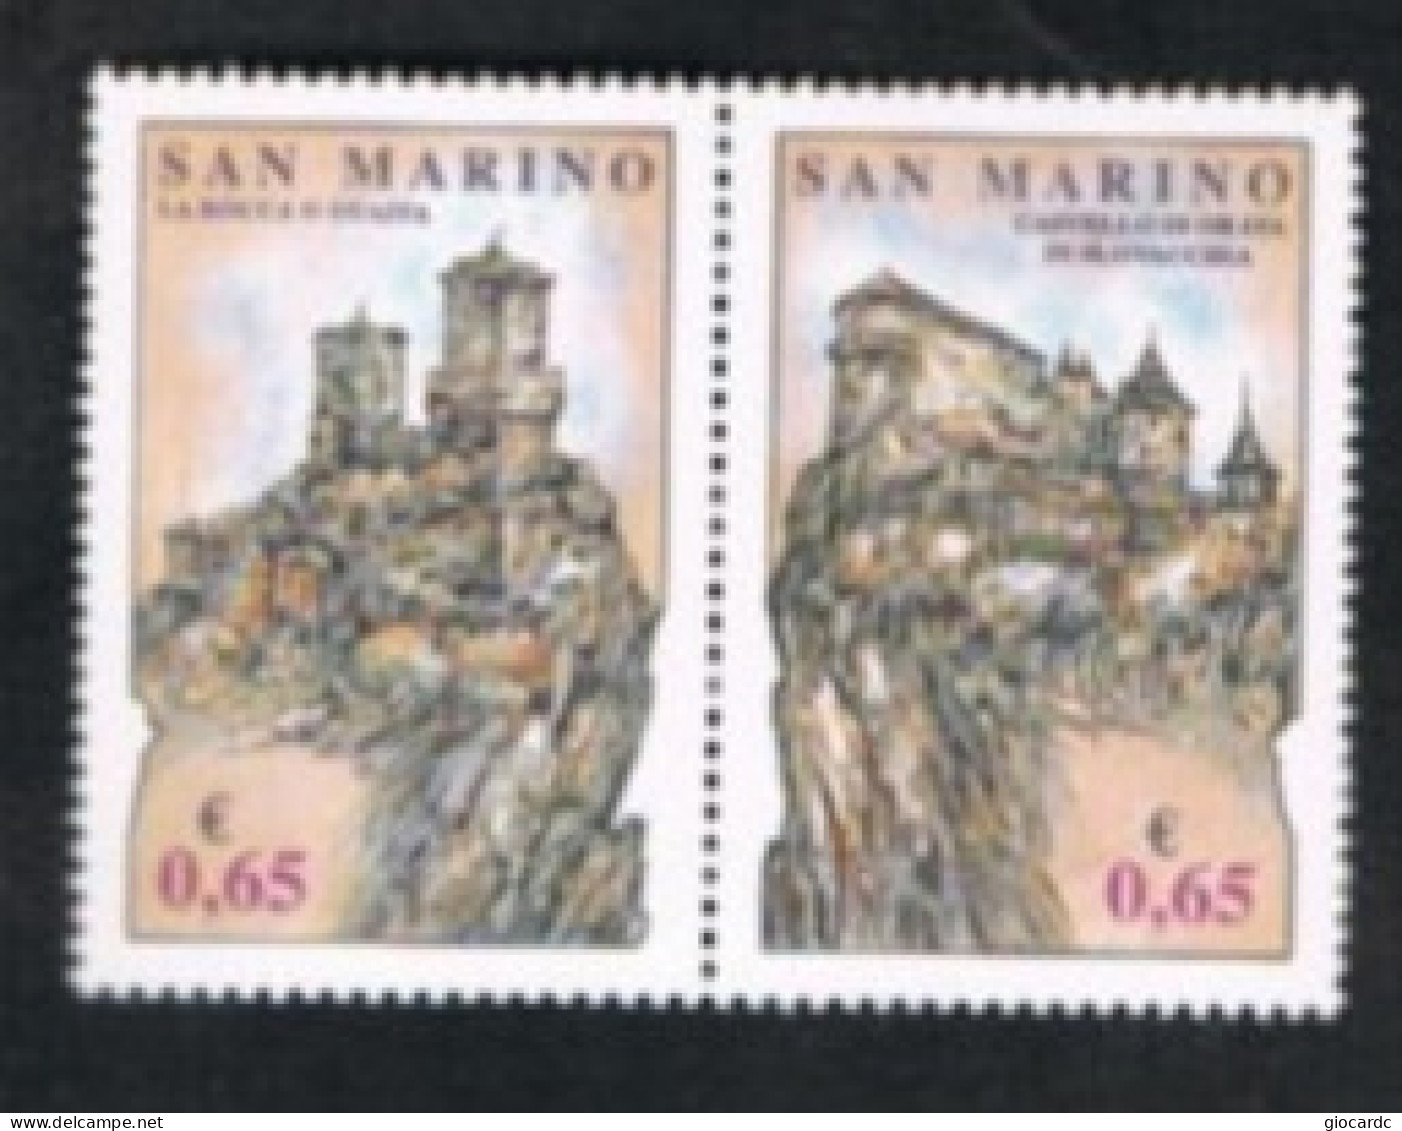 SAN MARINO - UN 2151.2152 - 2007 ROCCHE DI LIBERTA' (COMPLET SET OF 2 STAMPS SE-TENANT, BY BF)  - MINT ** - Unused Stamps